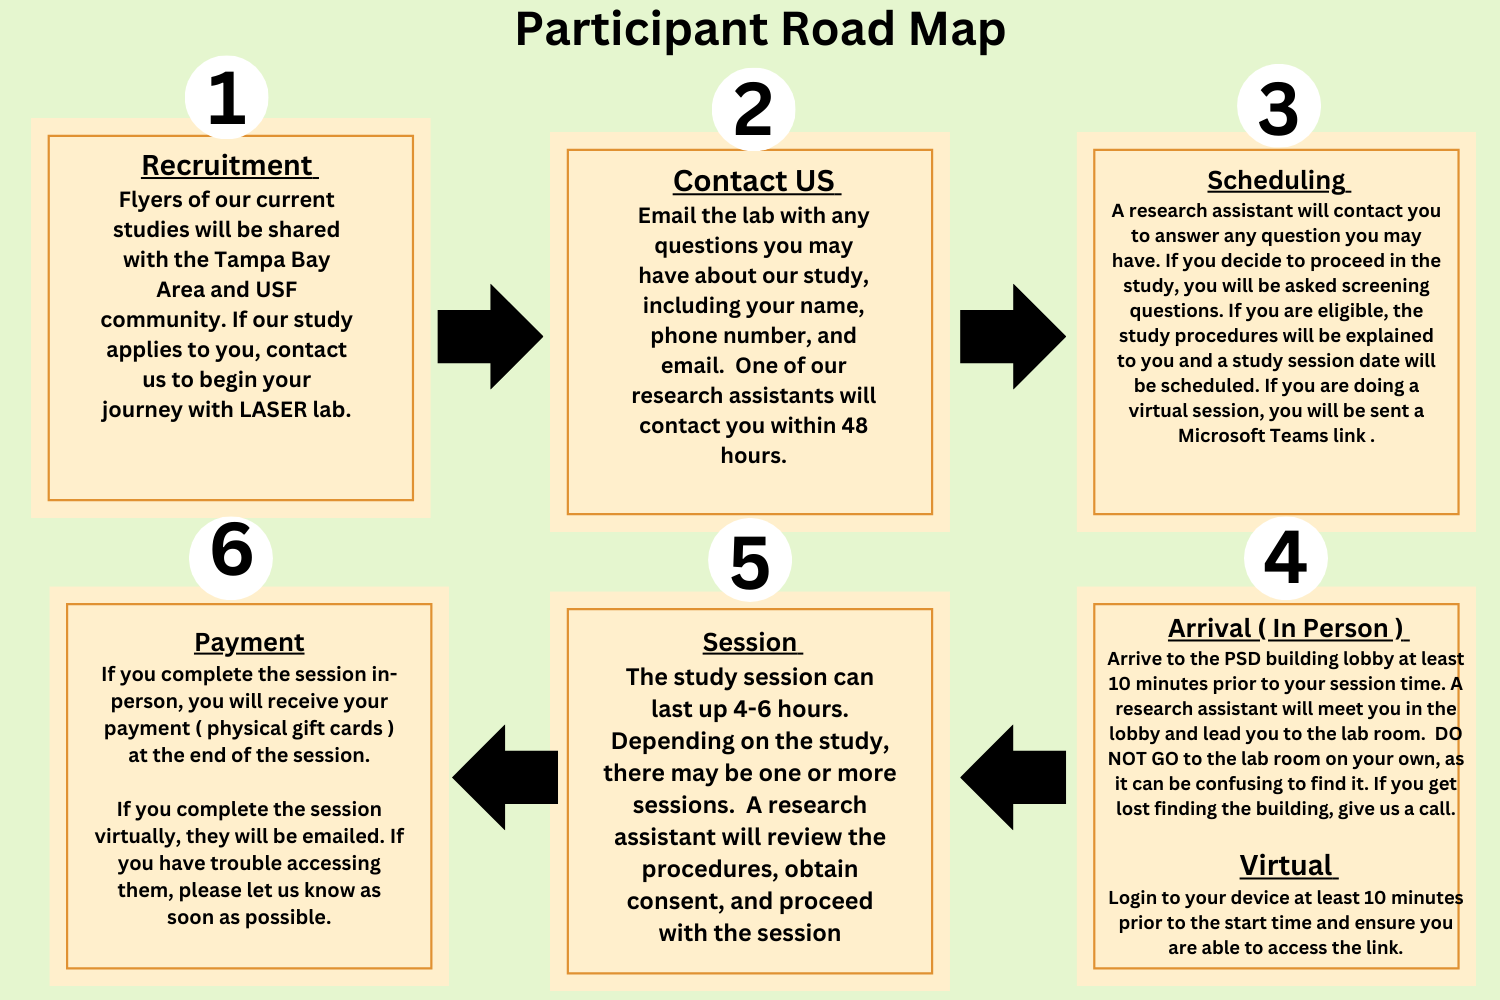 The Participant Road Map describes the patient's experience starting with their recruitment, followed by their scheduling, study visit, and payment after participation.